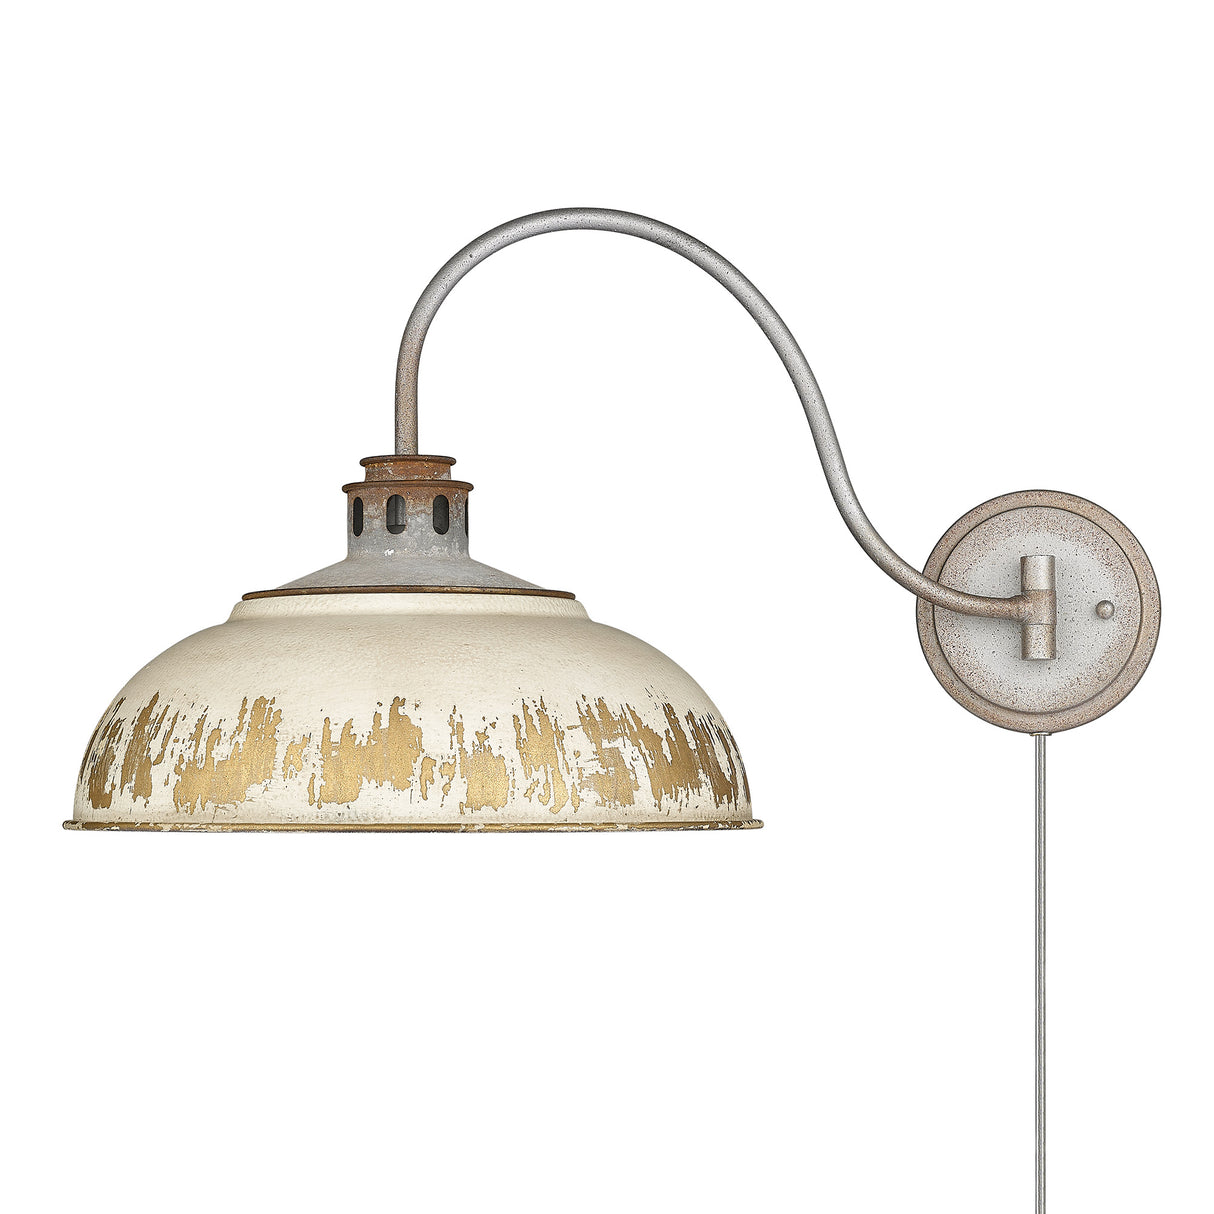 Kinsley 1 Light Articulating Wall Sconce in Aged Galvanized Steel with Antique Ivory Shade